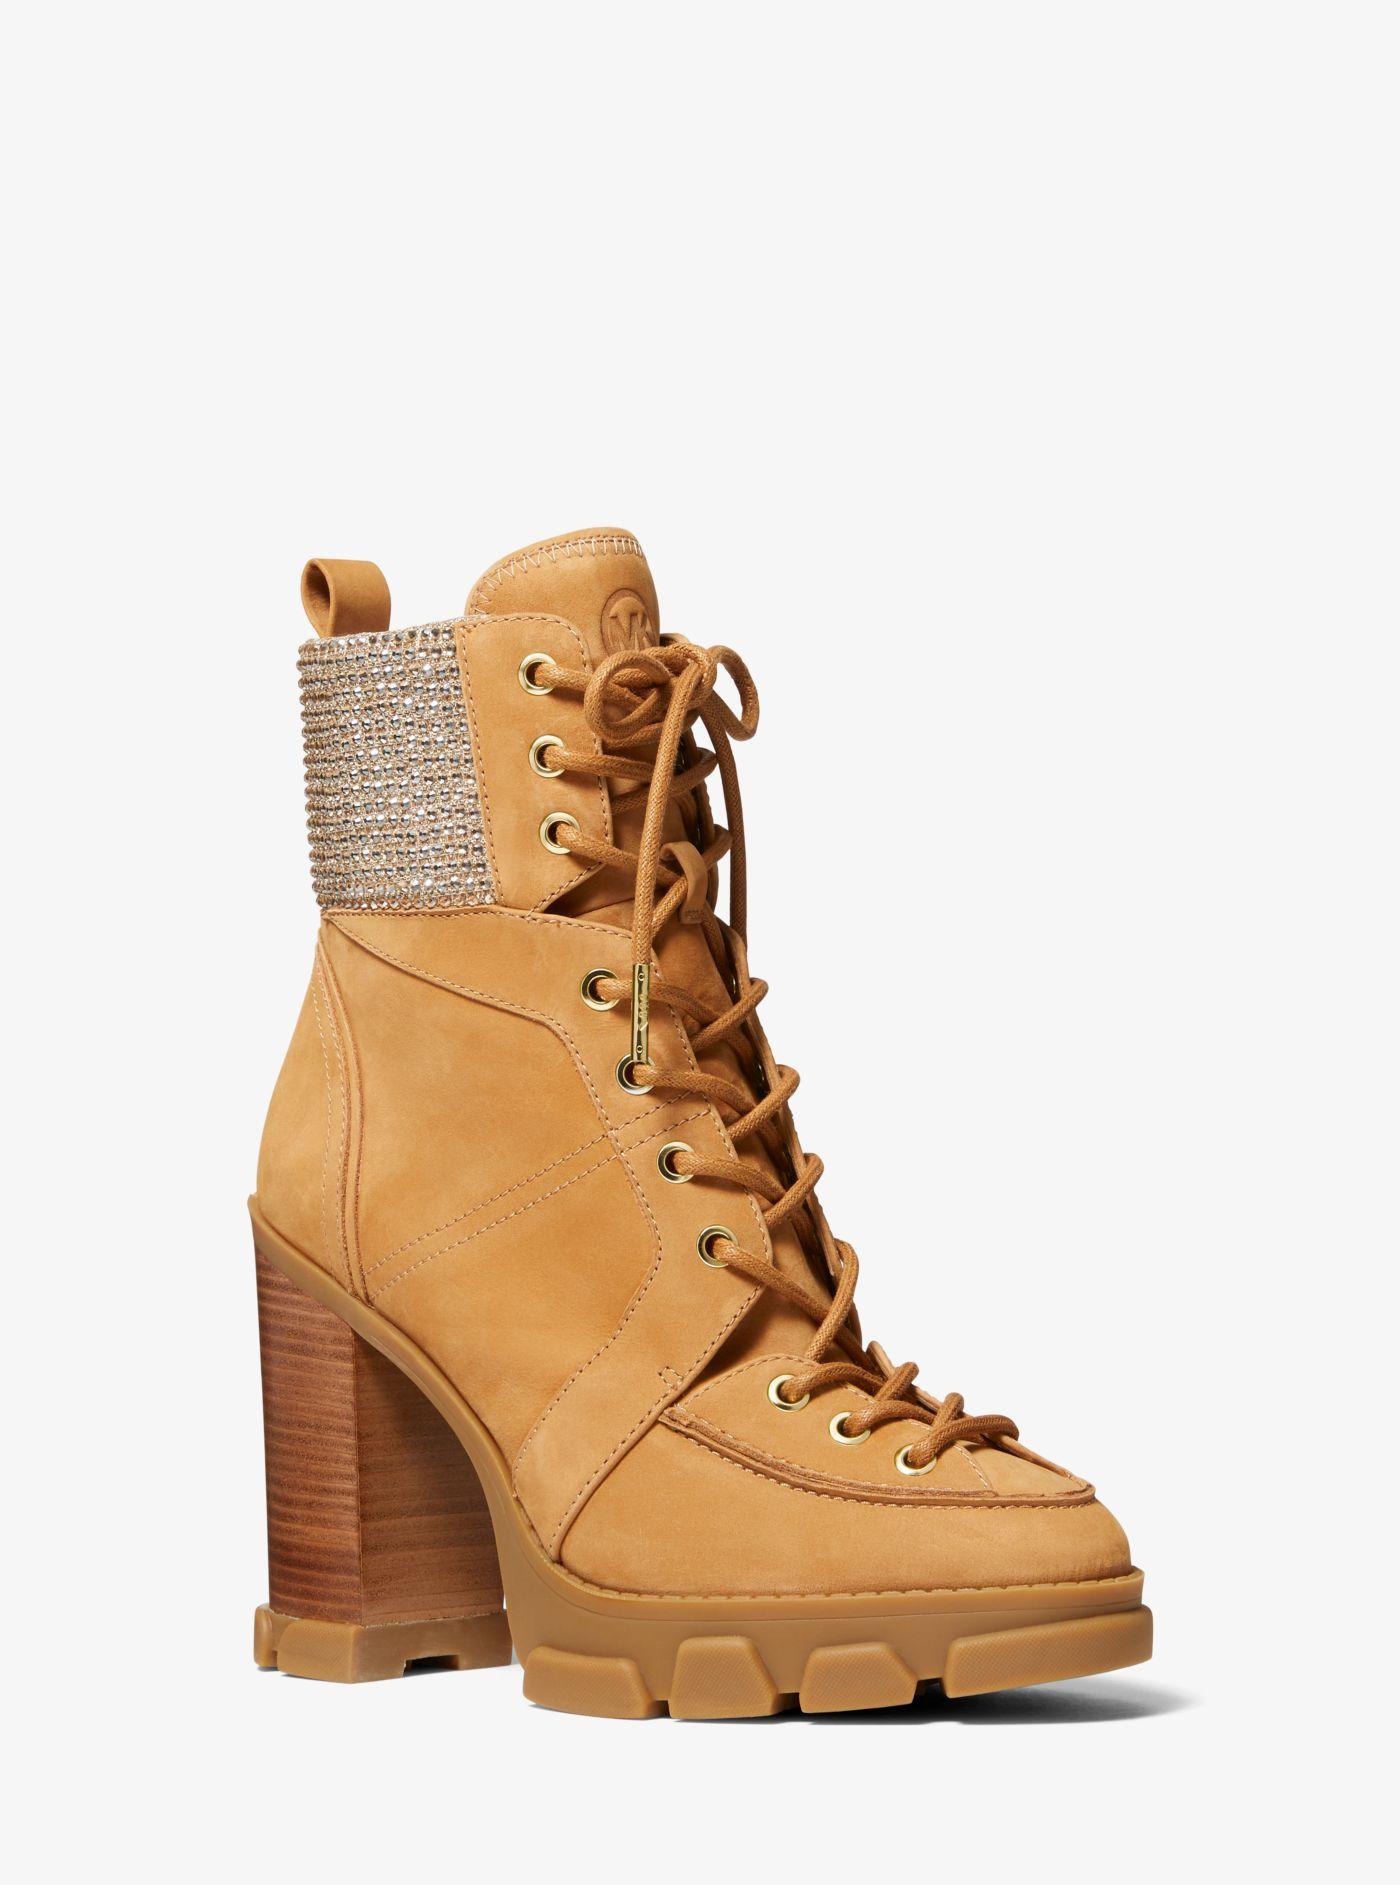 Michael Kors Ridley Embellished Nubuck Lace-up Boot in Brown | Lyst